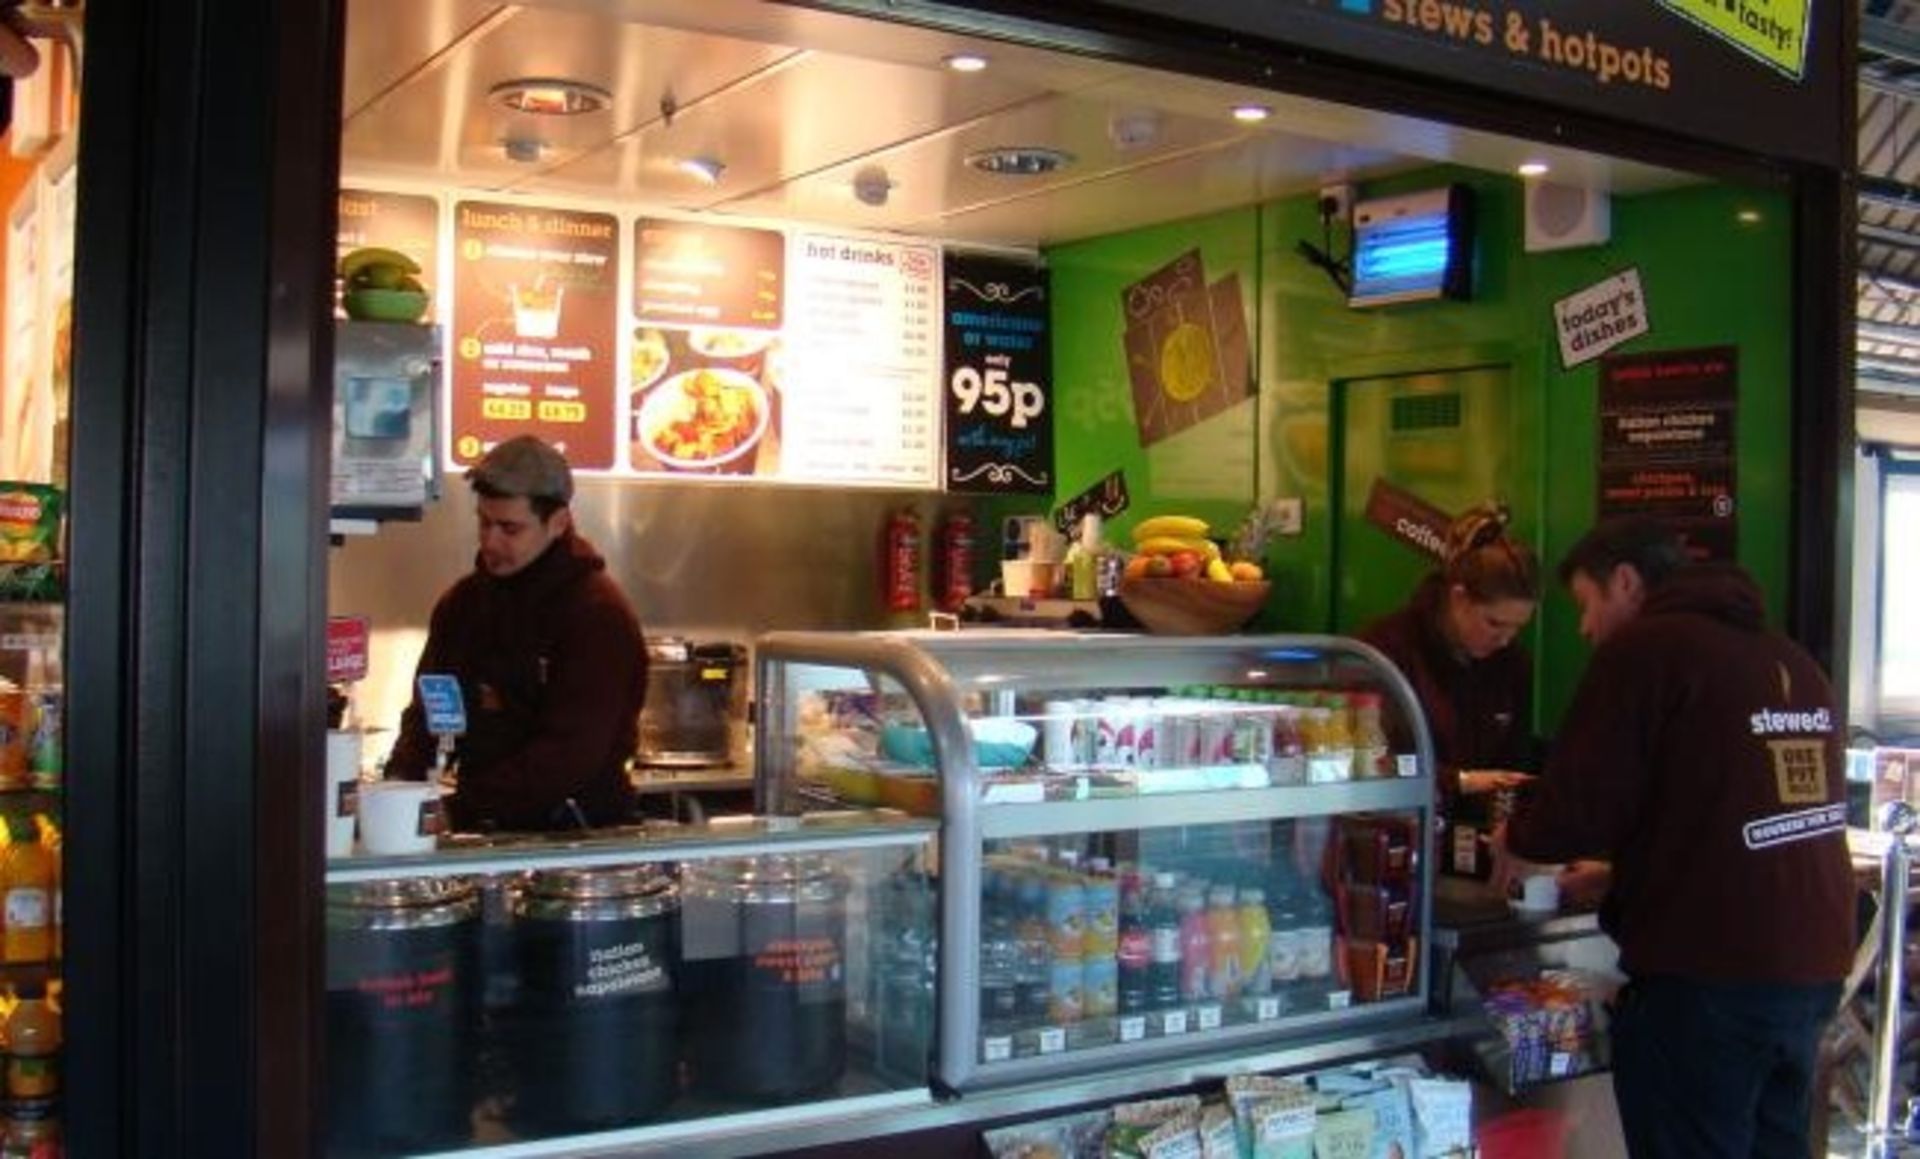 AJC Retail Solutions - Stewed Food and Coffee Kiosk - Complete Business Opportunity! - Image 3 of 25